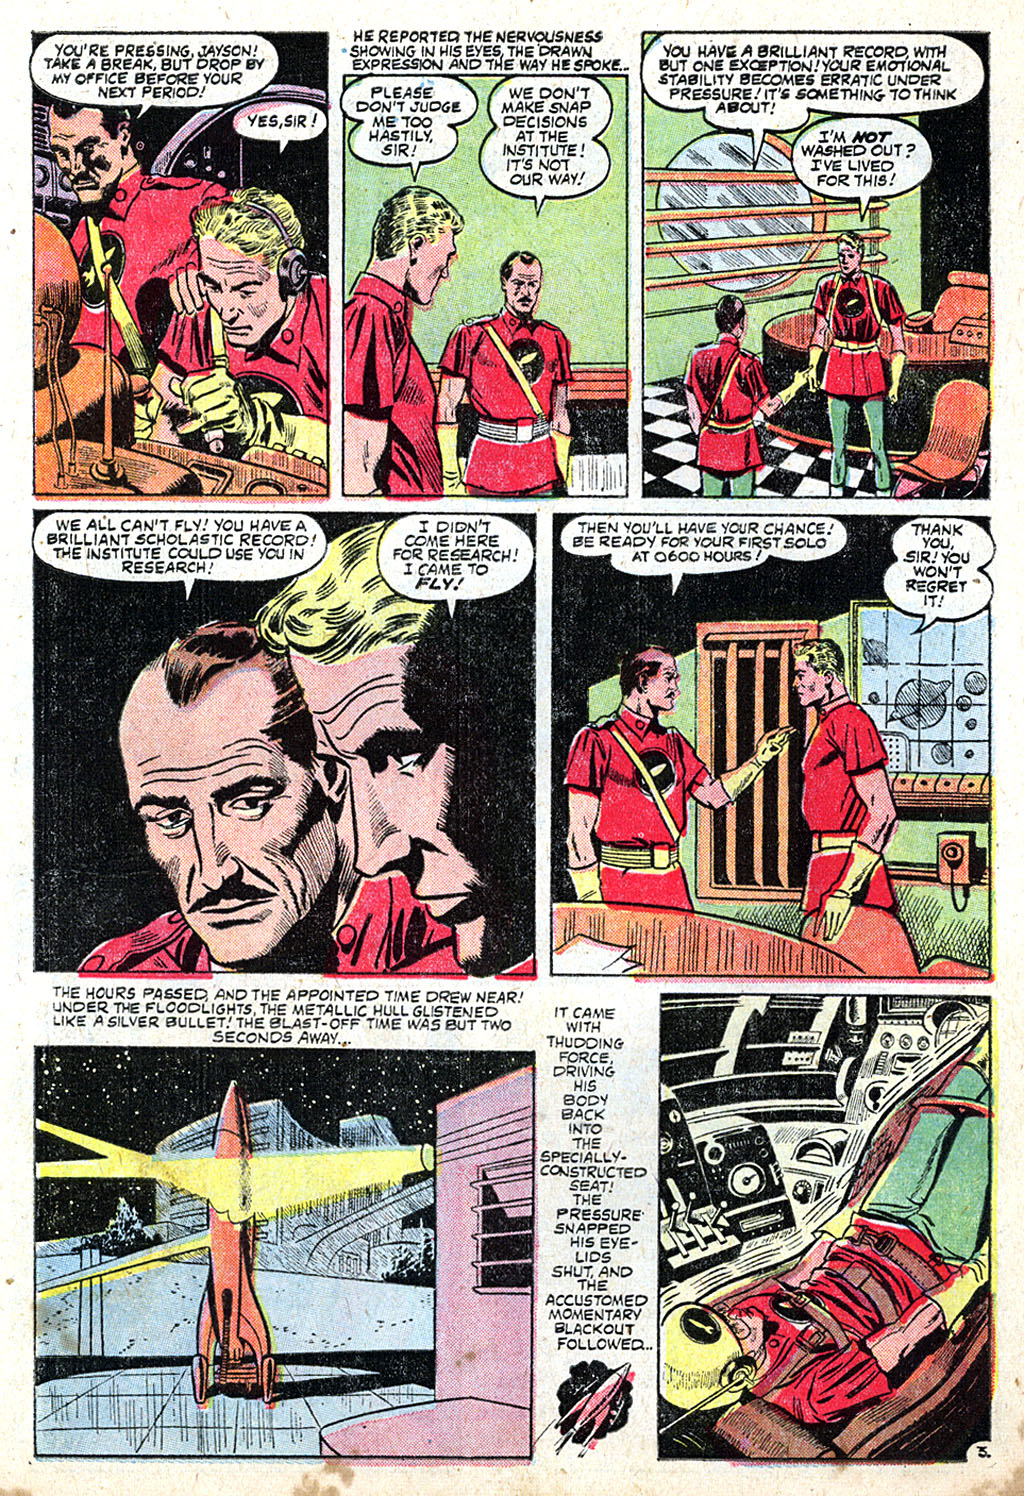 Marvel Tales (1949) 138 Page 28